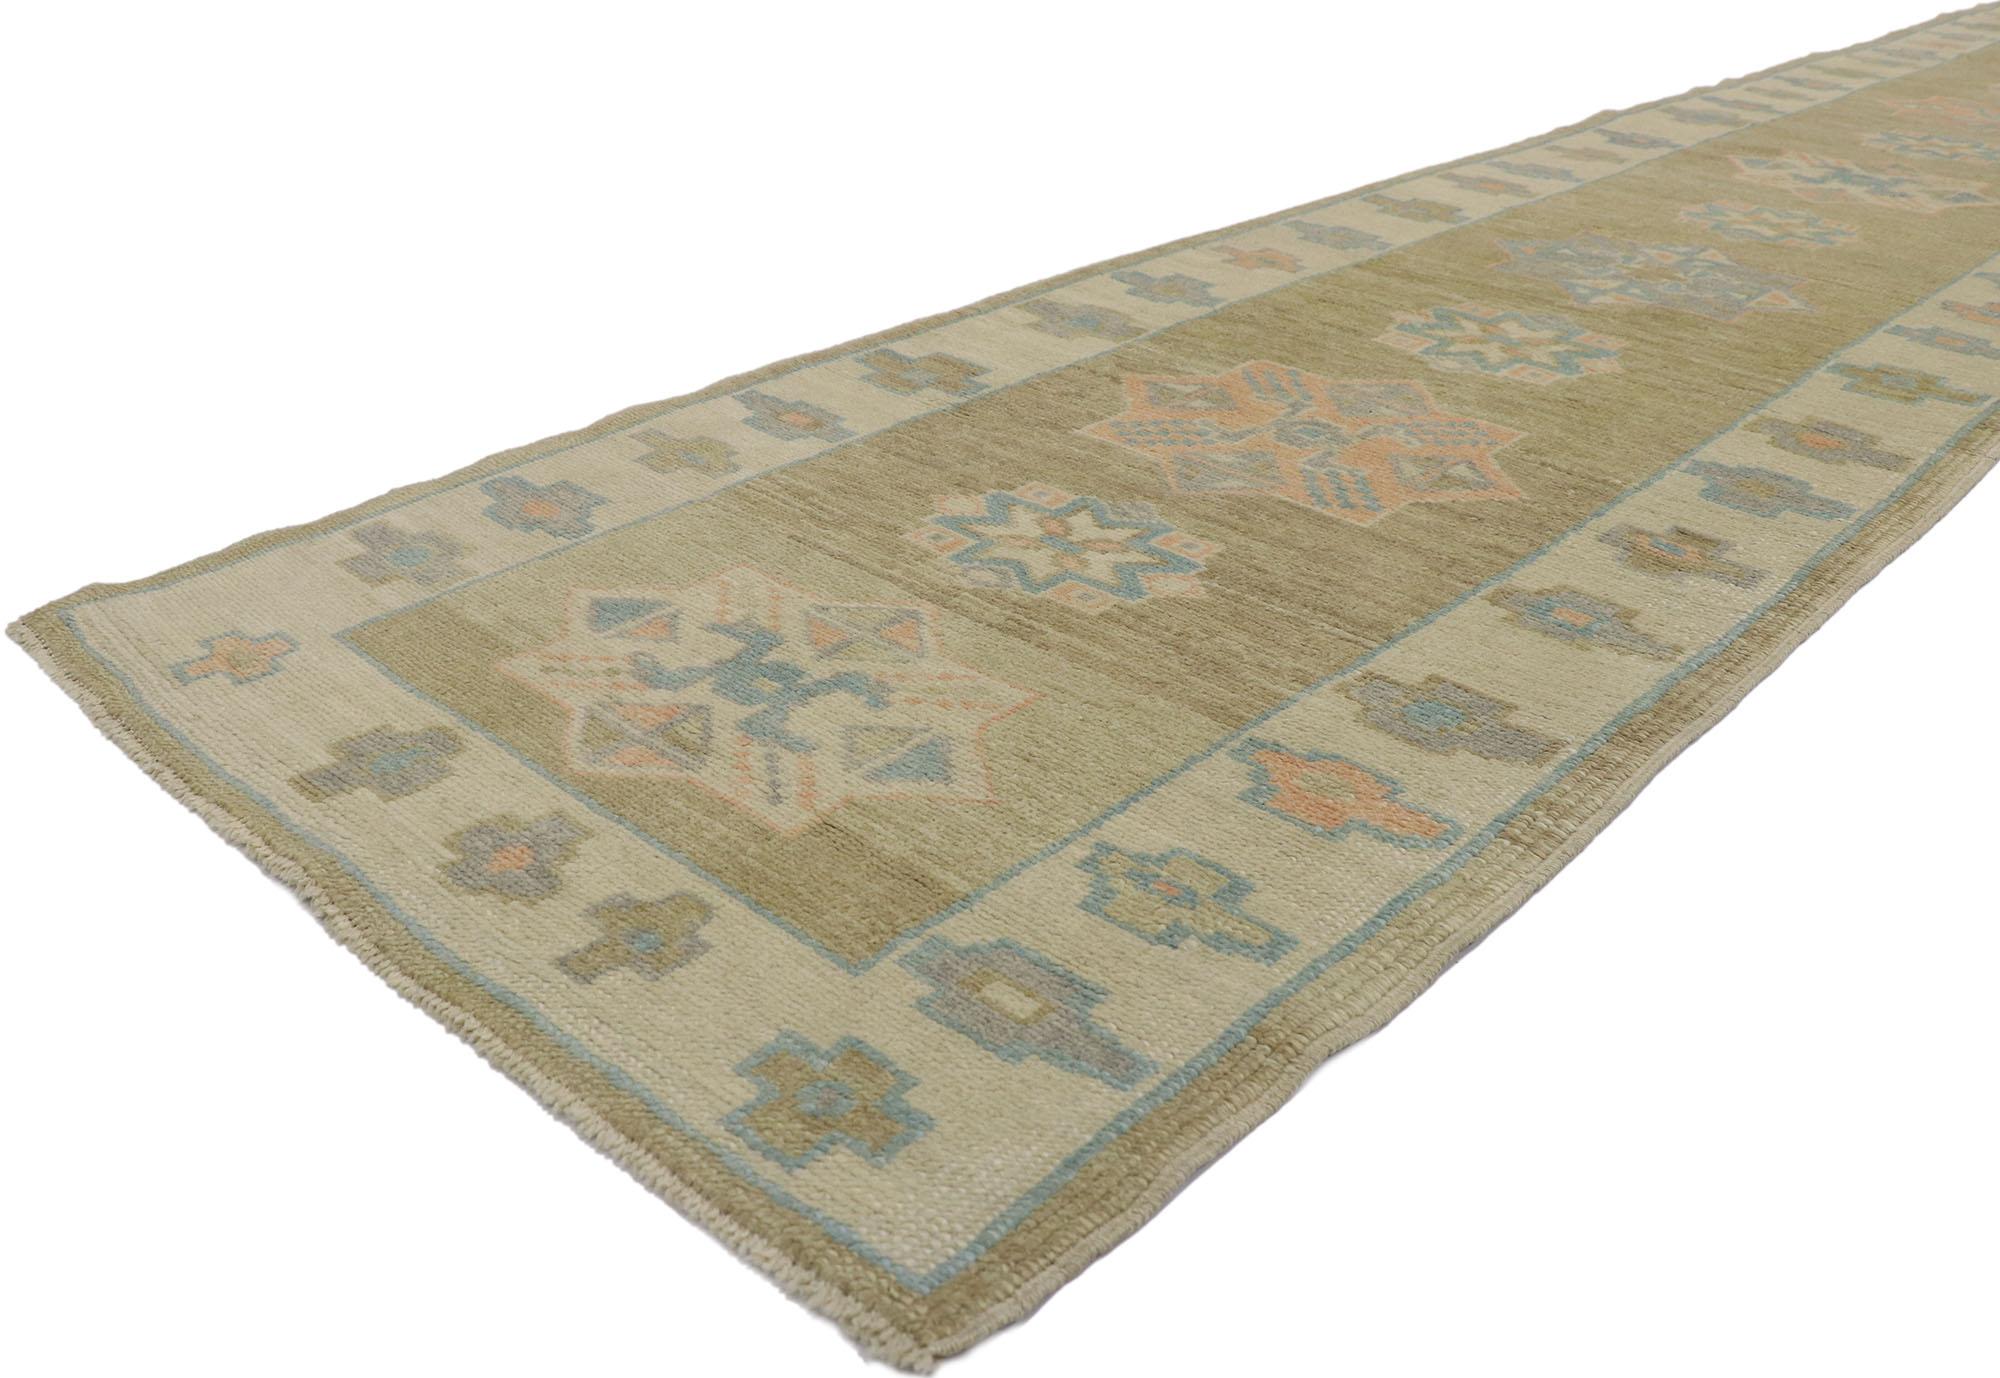 53585 New Contemporary Turkish Oushak Runner with Modern Style 03'01 x 15'11. This hand-knotted wool contemporary Turkish Oushak runner features an all-over geometric pattern spread across an abrashed tan and taupe striated field. An array of tribal